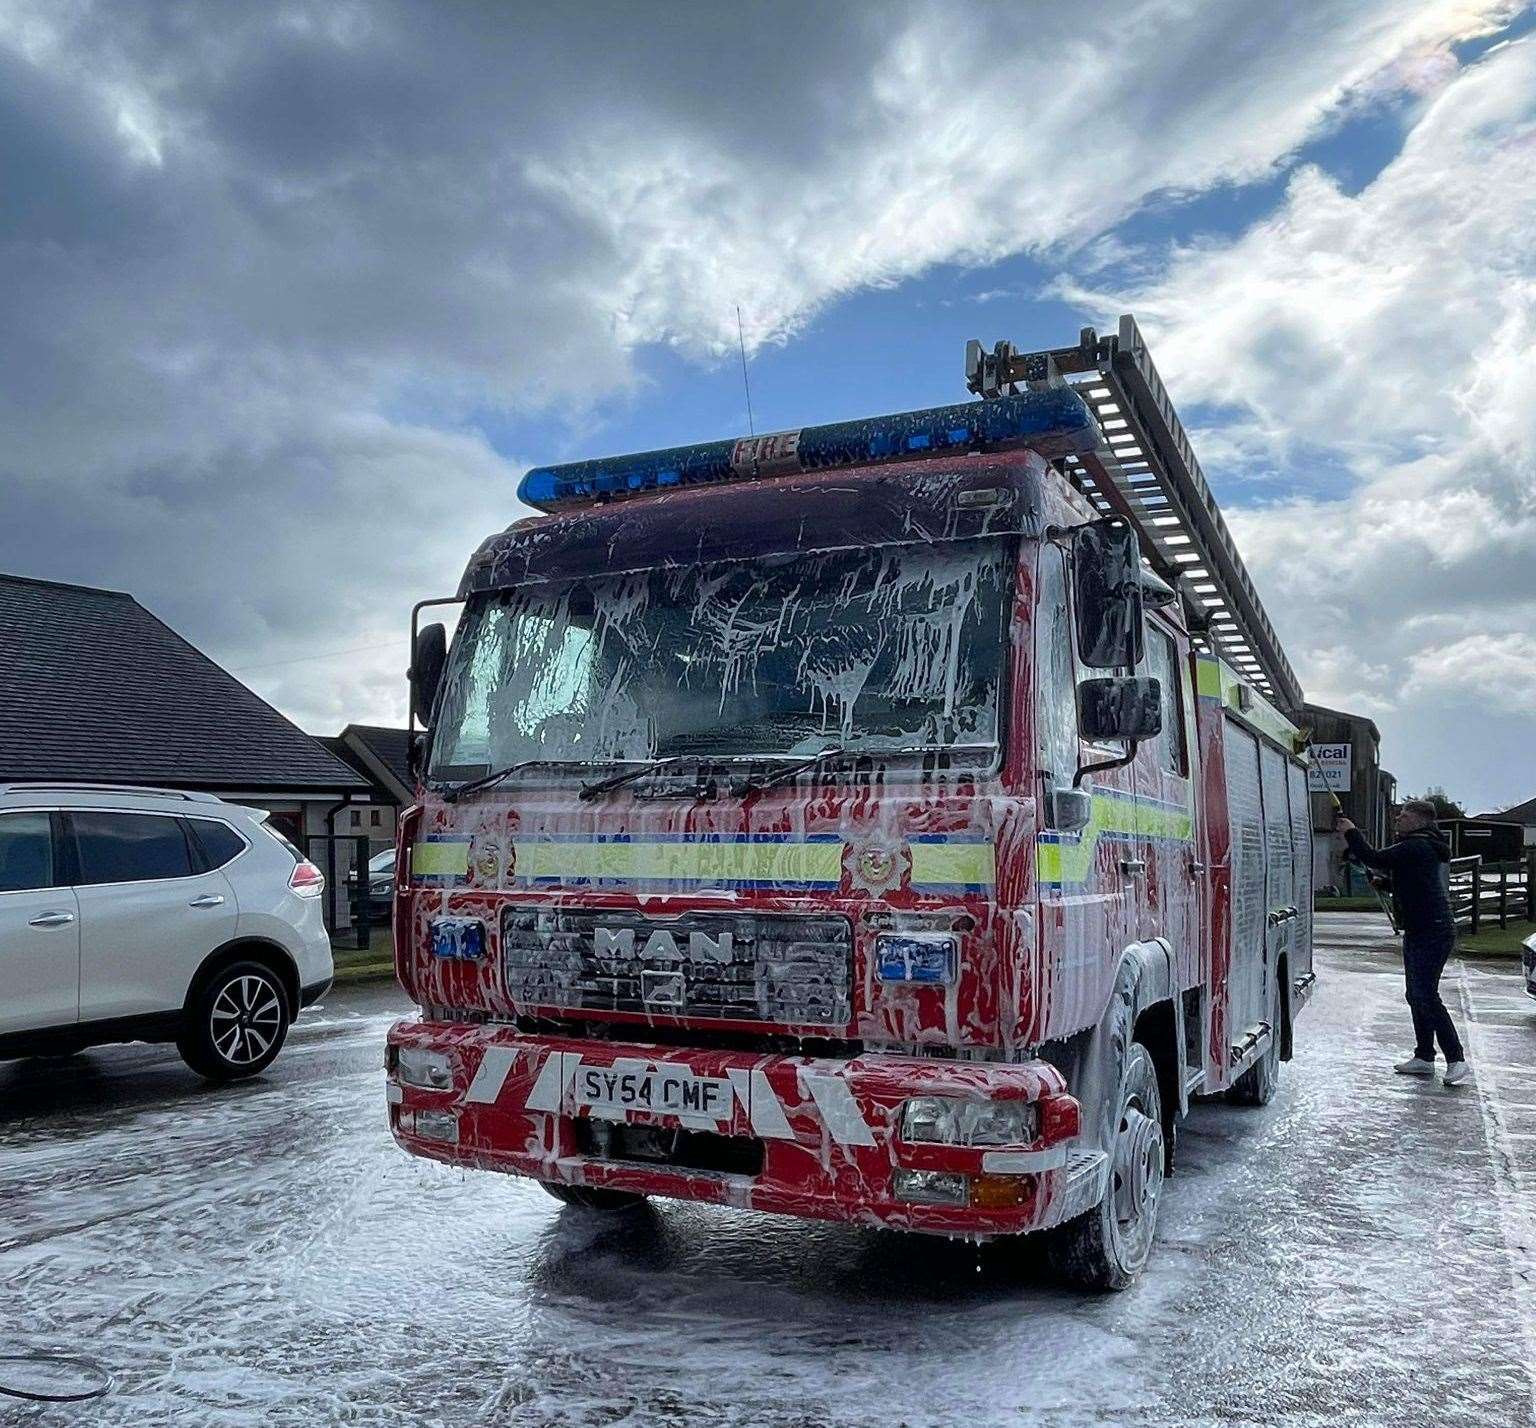 The Helmsdale fire appliance, looking fantastic in the suds!